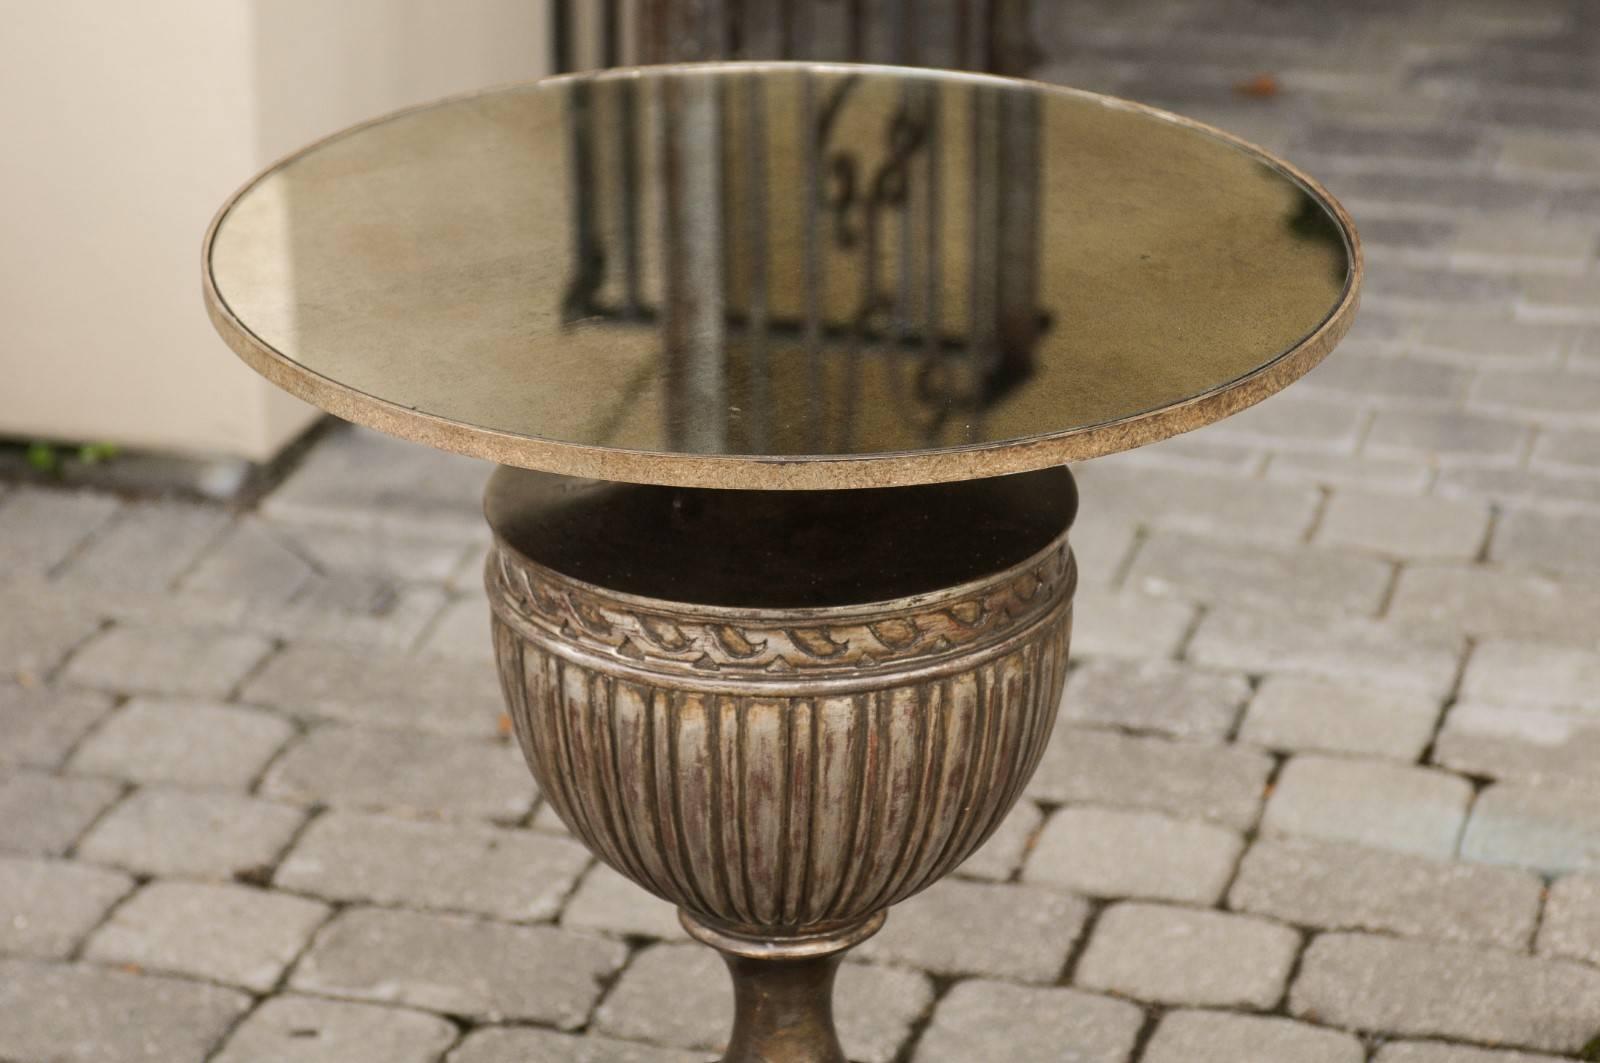 Pair of Italian 1950s Urn Mirrored Top Side Tables with Burnished Silver Finish For Sale 4